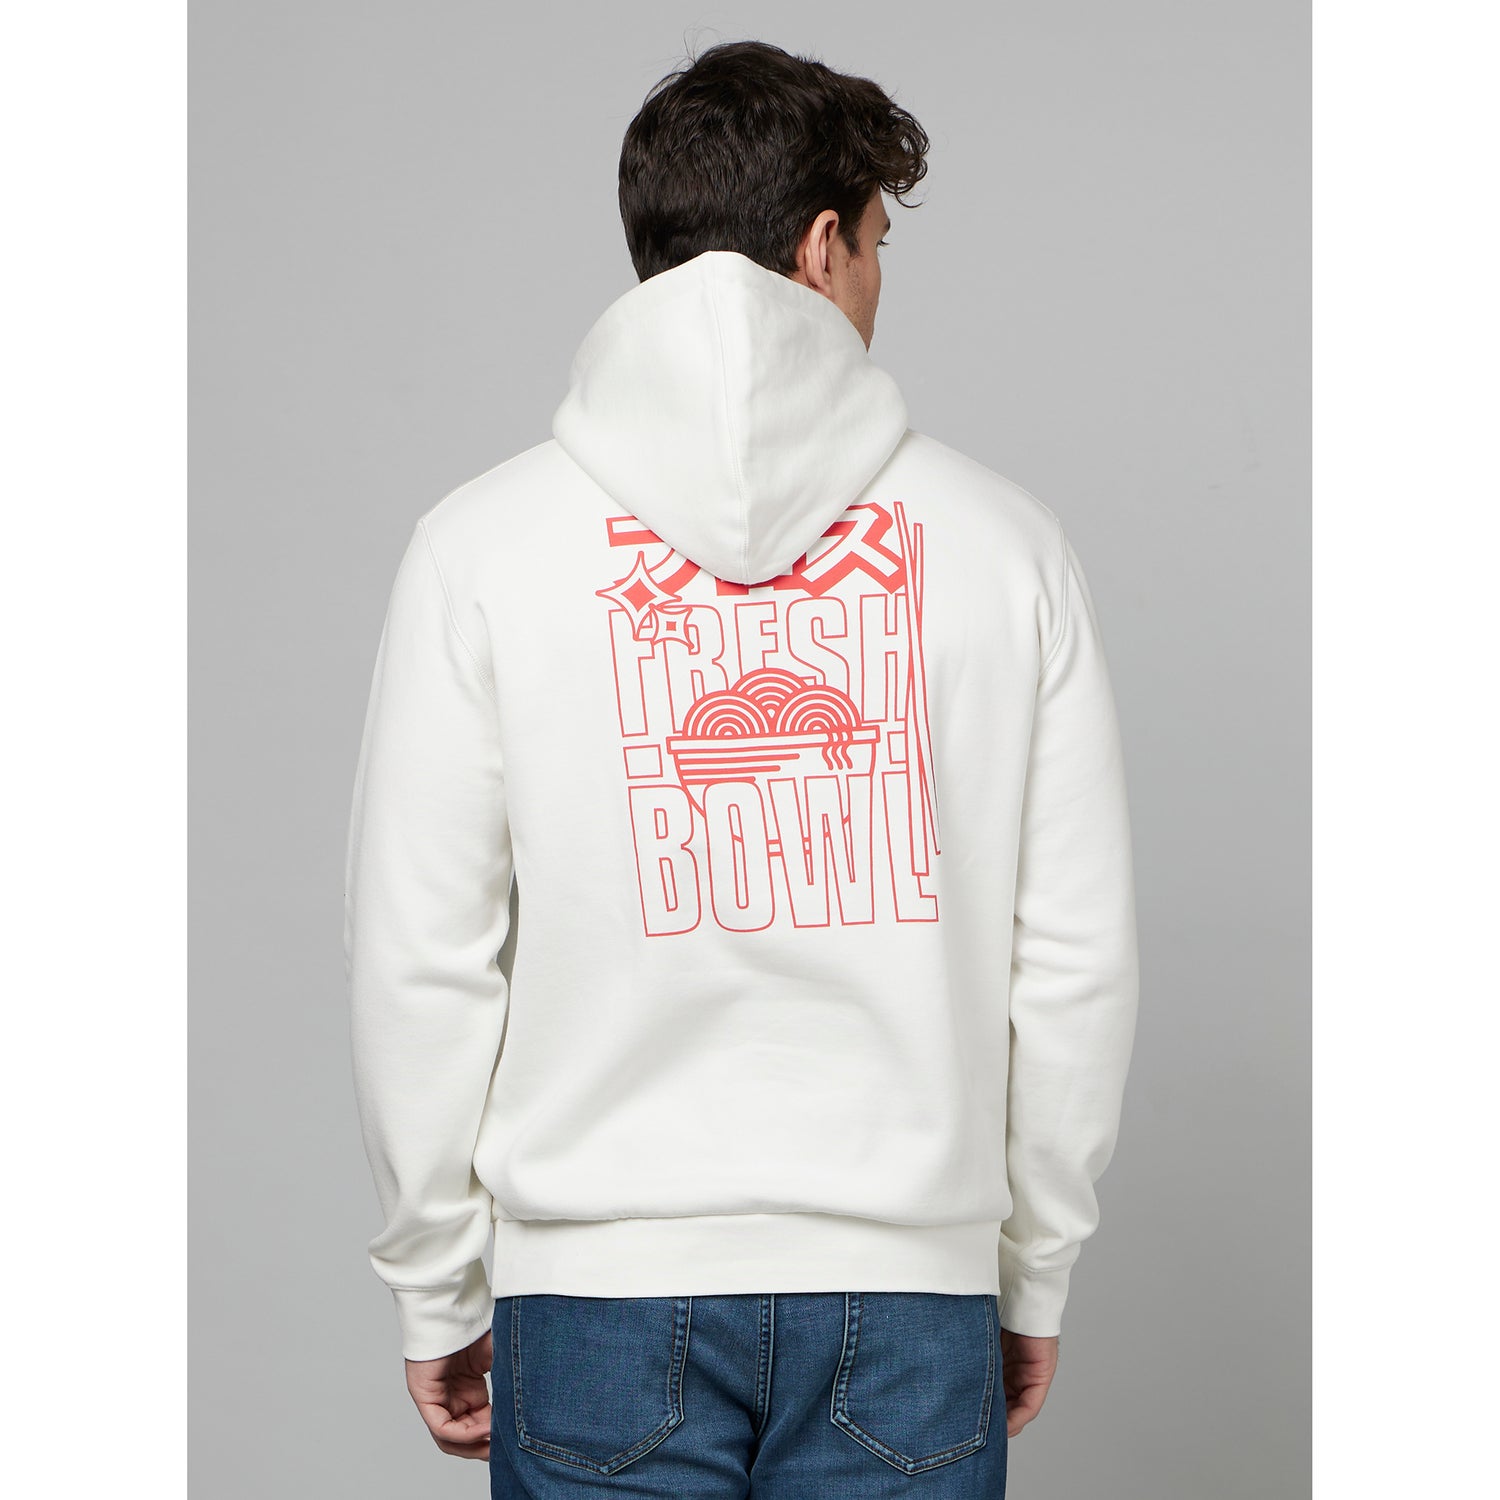 White Typography Printed Hooded Cotton Pullover Sweatshirt (FEJABOWL)